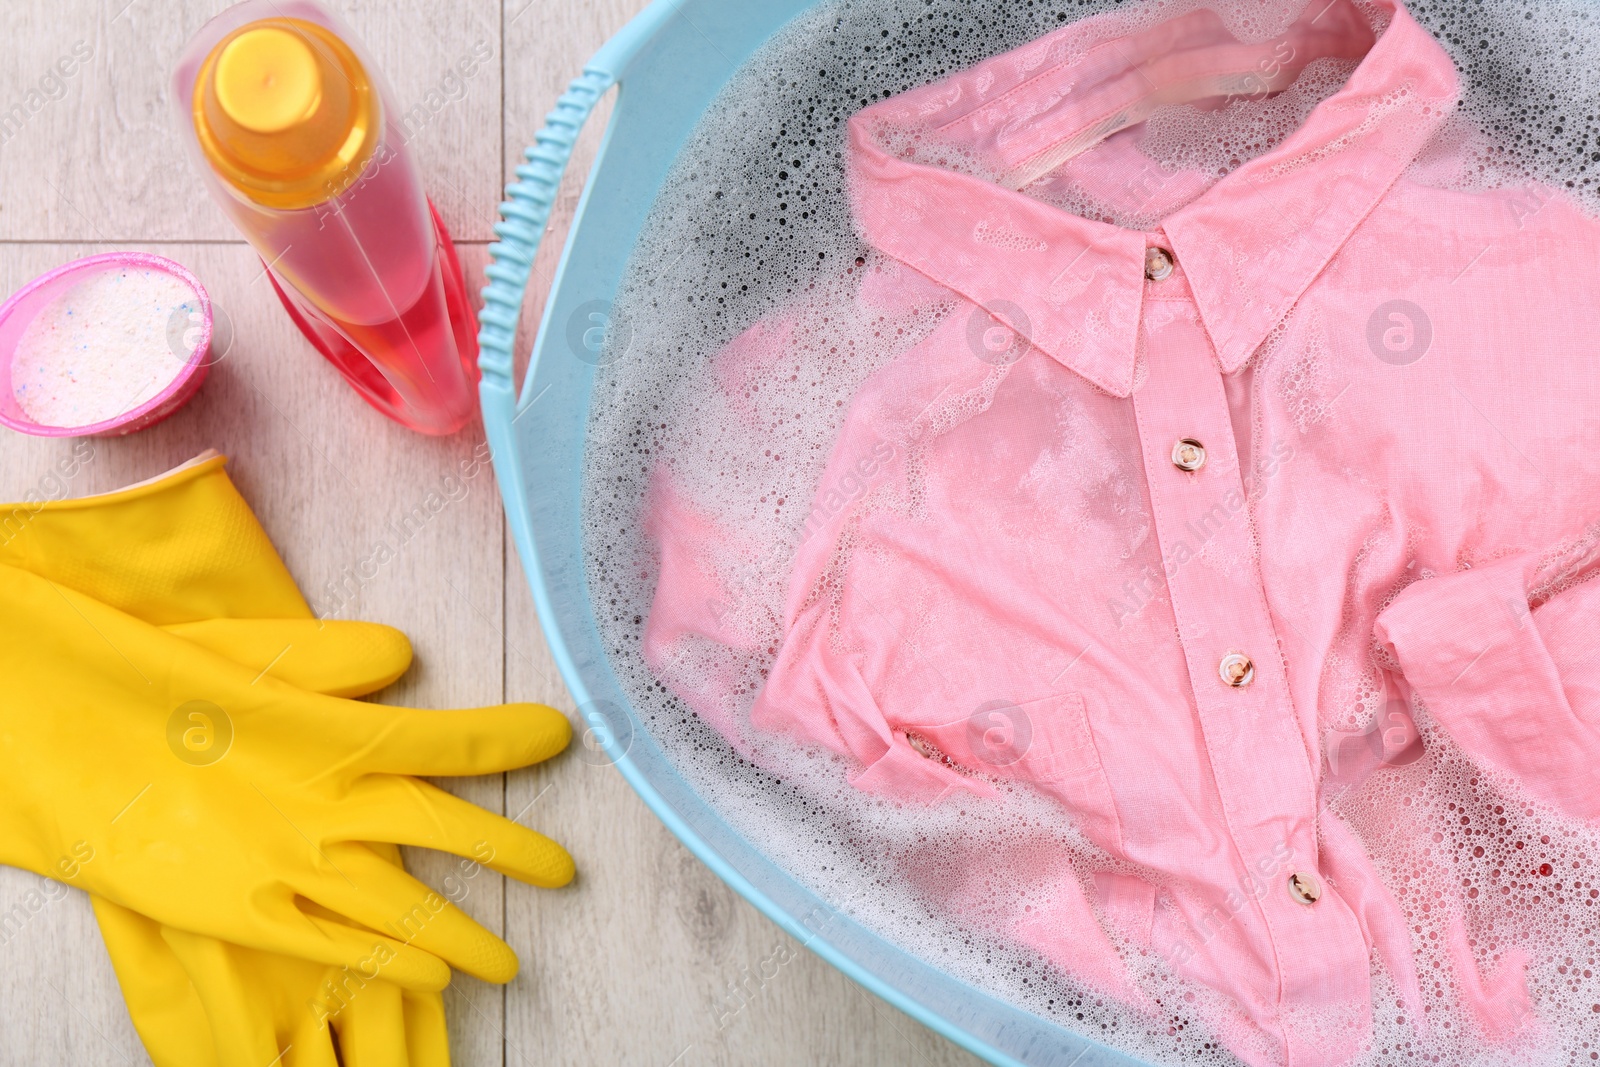 Photo of Pink shirt in basin, powder, gloves and bottle of detergent on floor, flat lay. Hand washing laundry